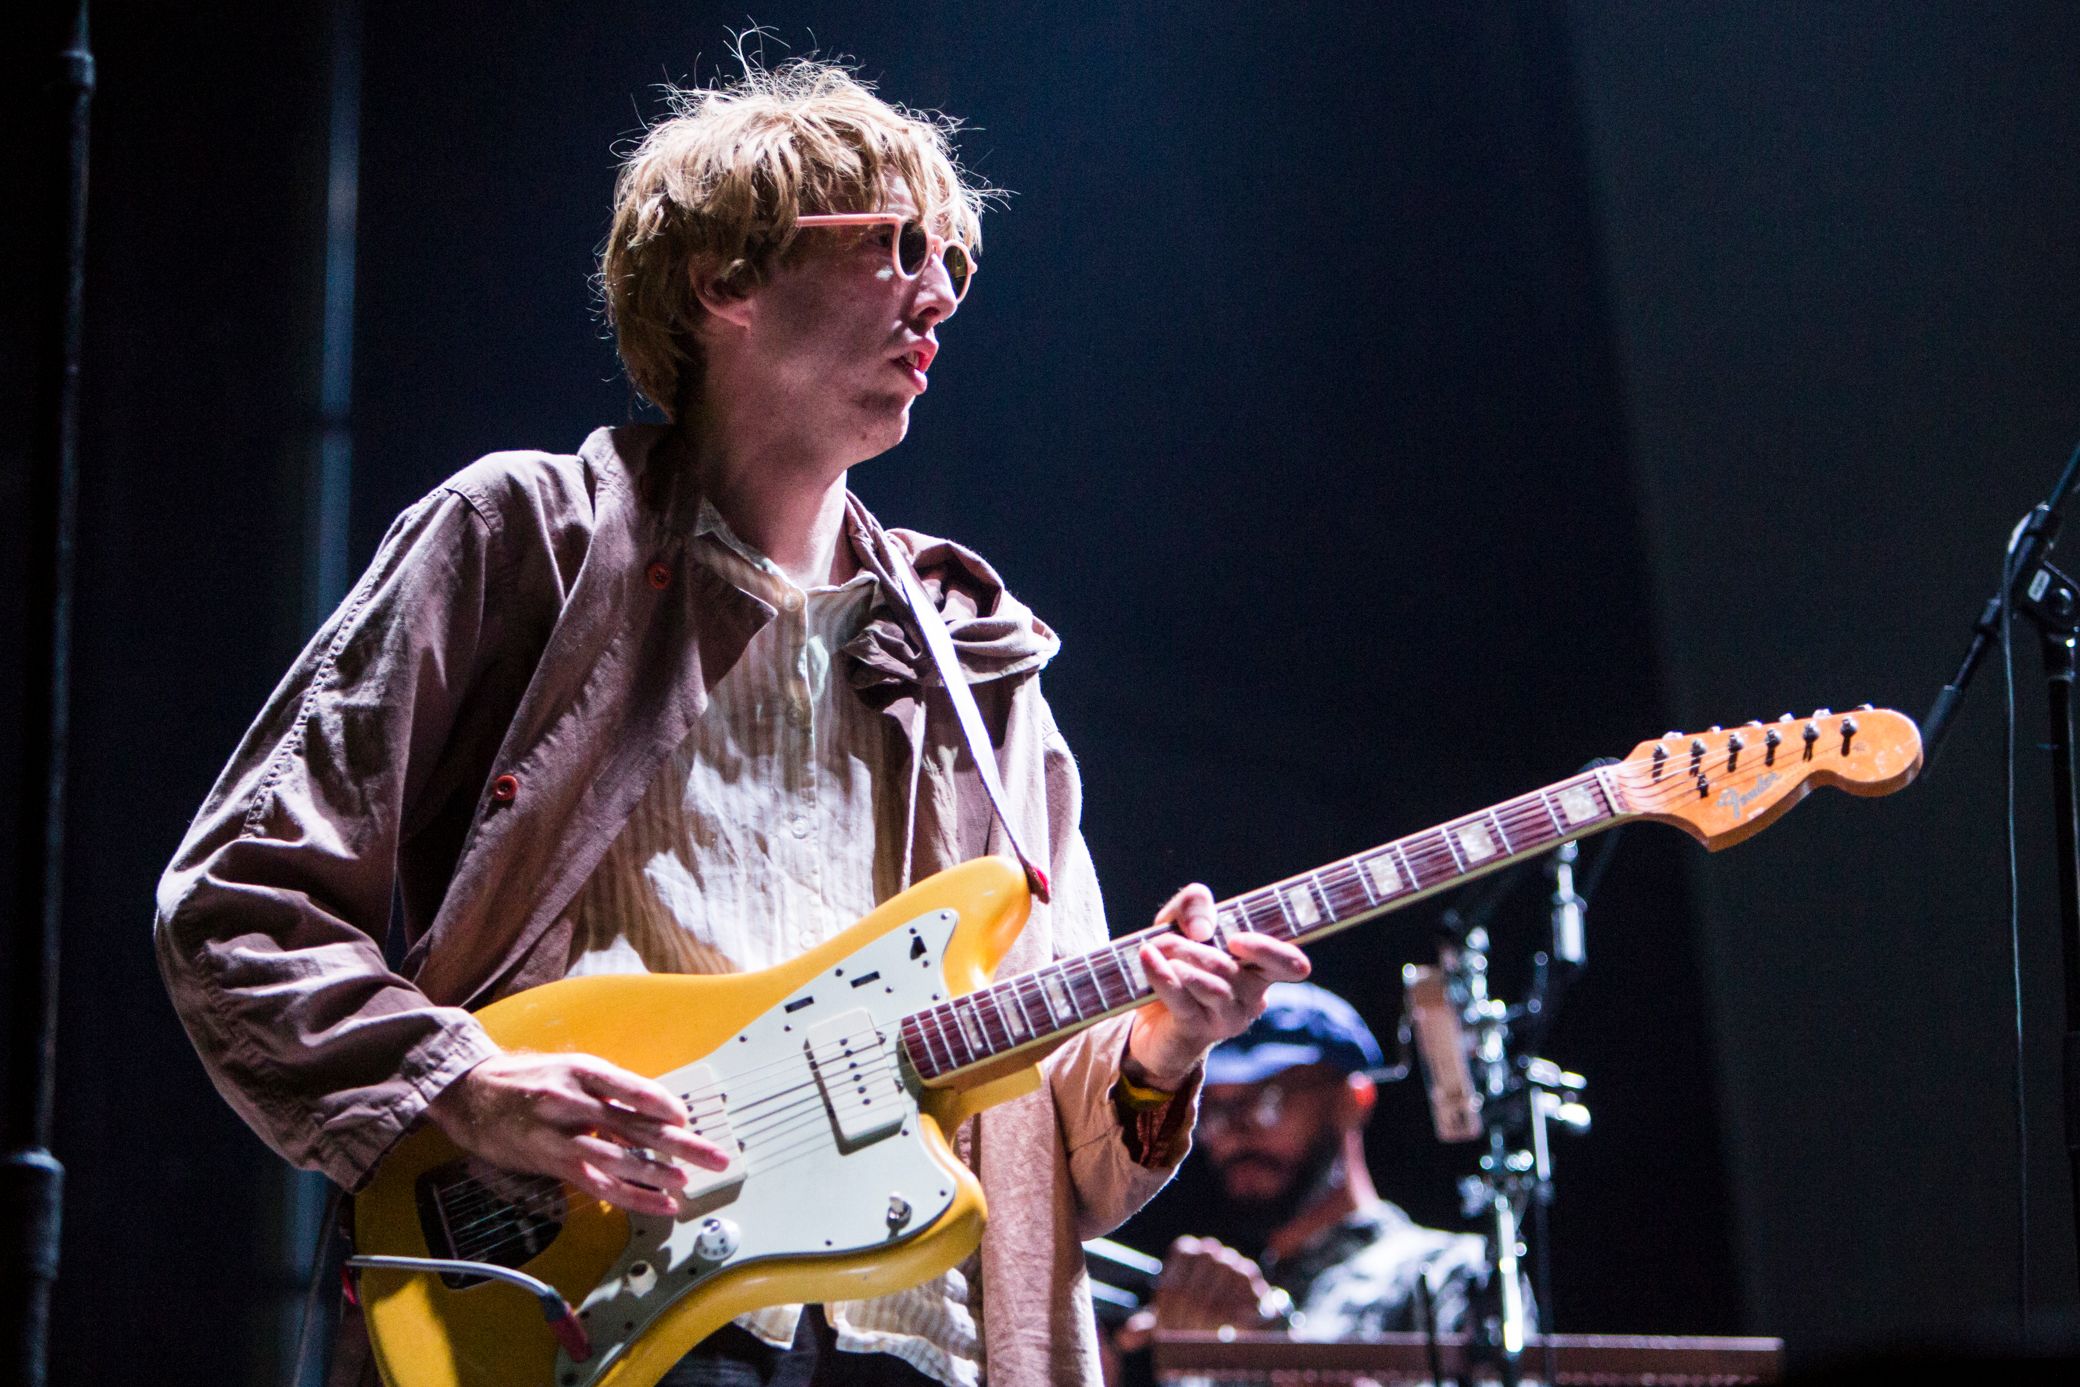 deerhunter 5 Live Review: Interpols Turn on the Bright Lights Turns 15 in Los Angeles (9/30)